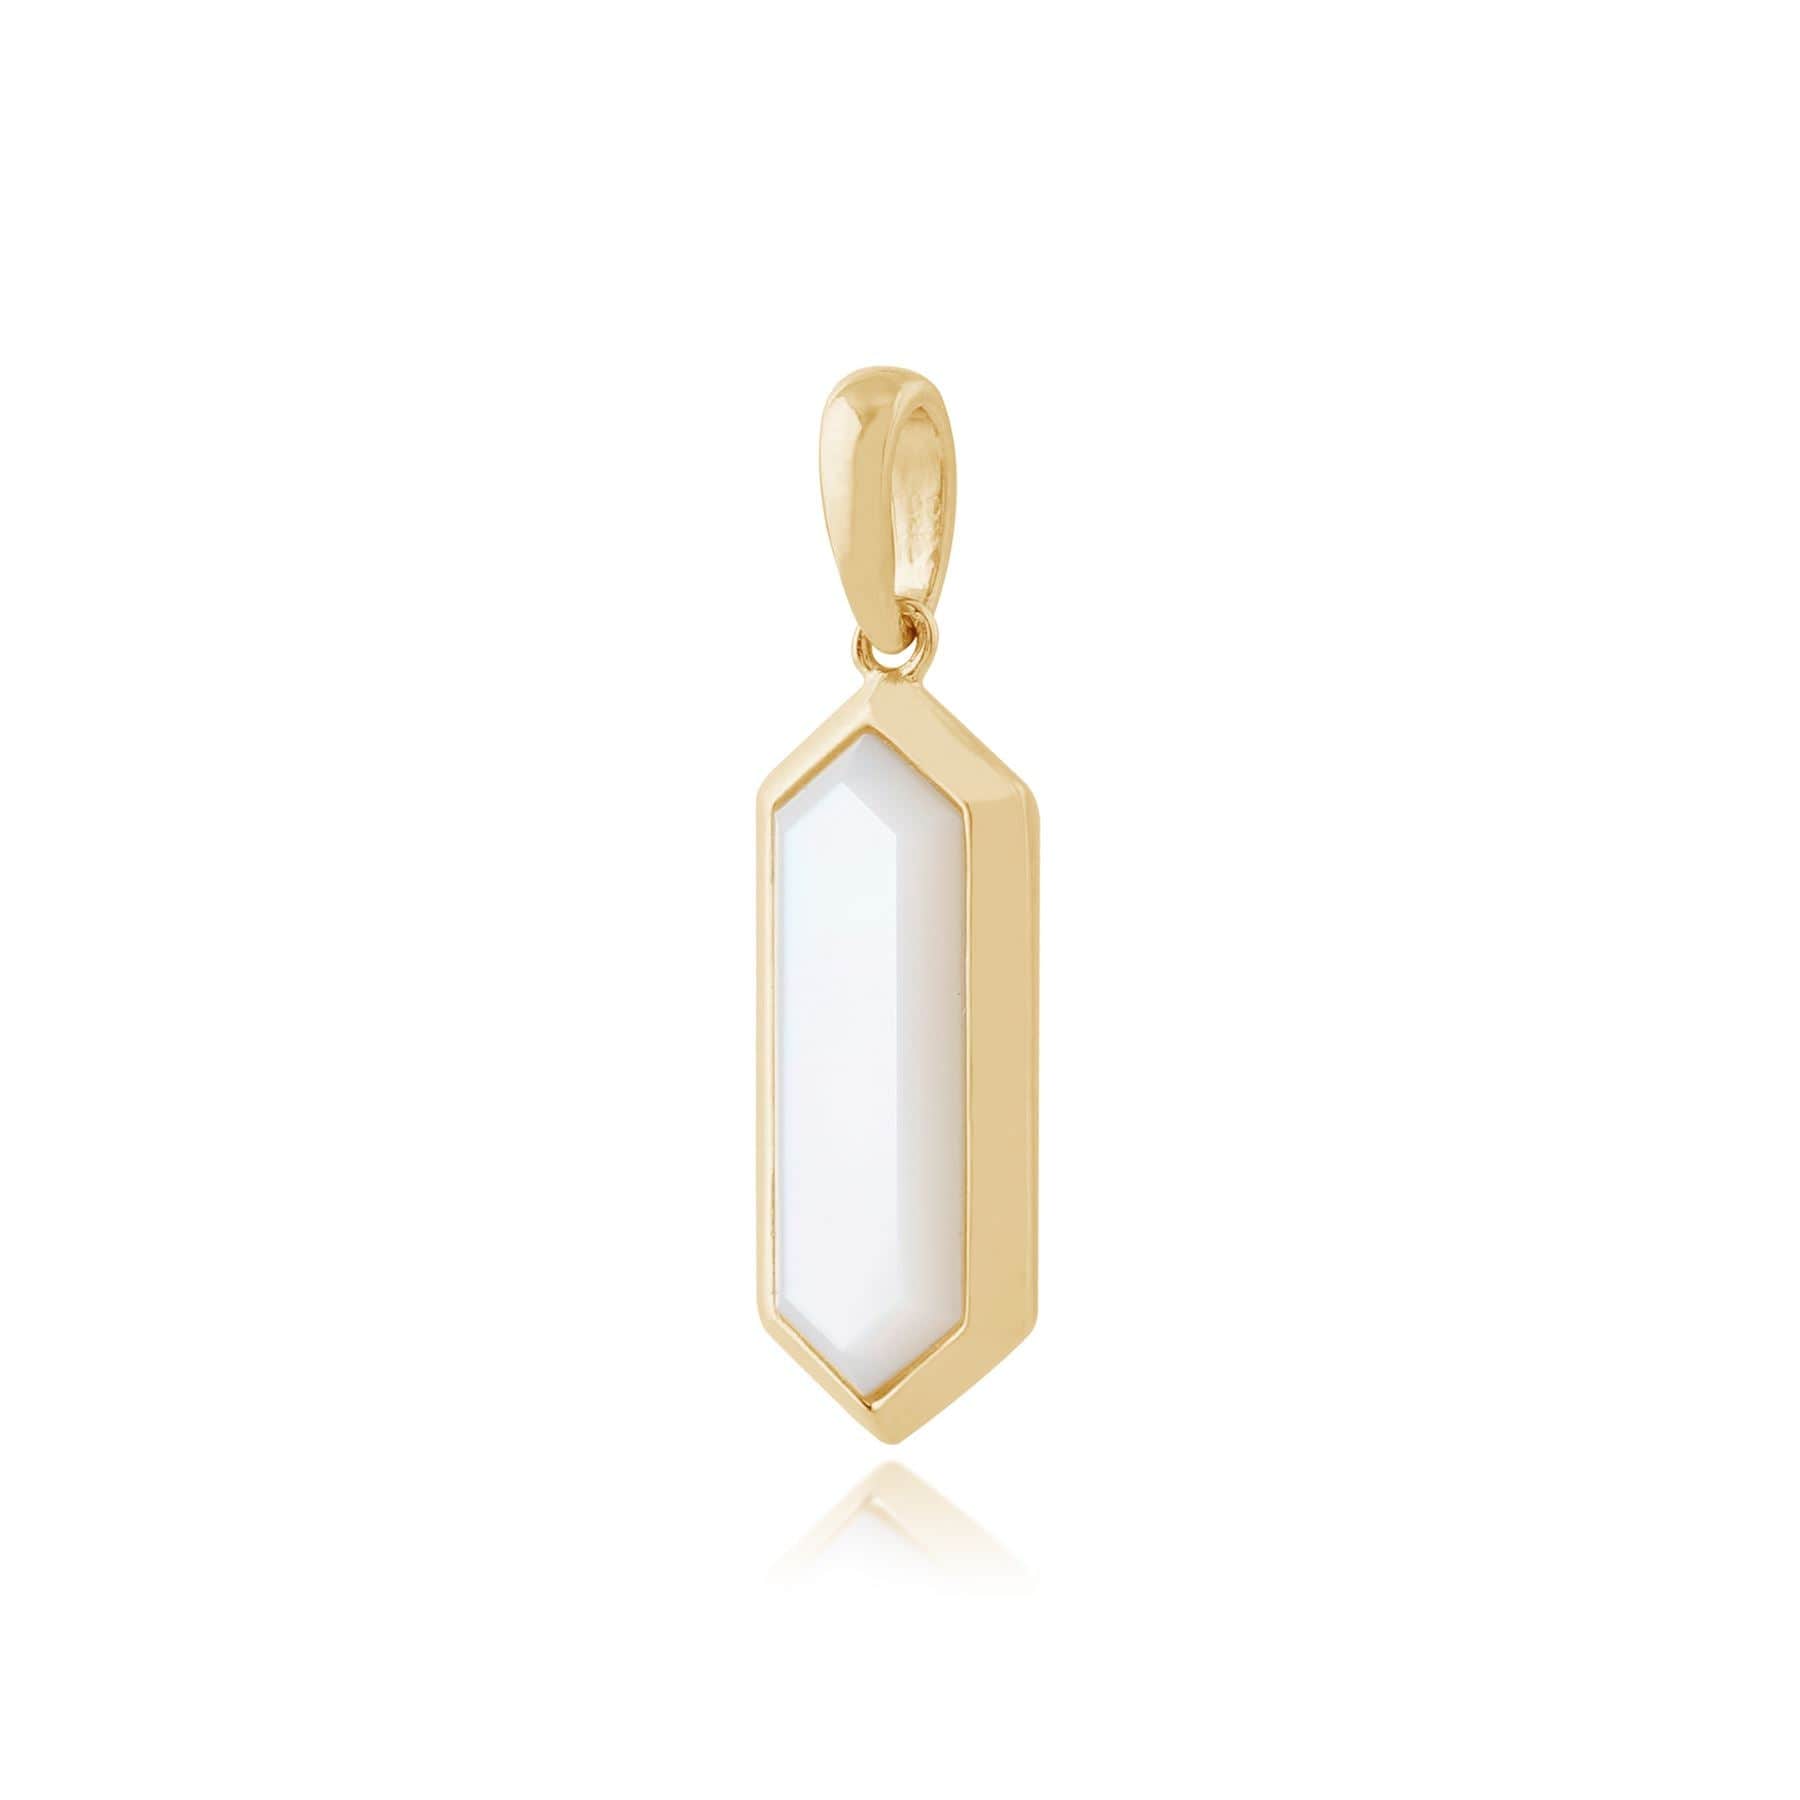 Geometric Hexagon Mother of Pearl Prism Drop Pendant in Gold Plated Silver - Gemondo